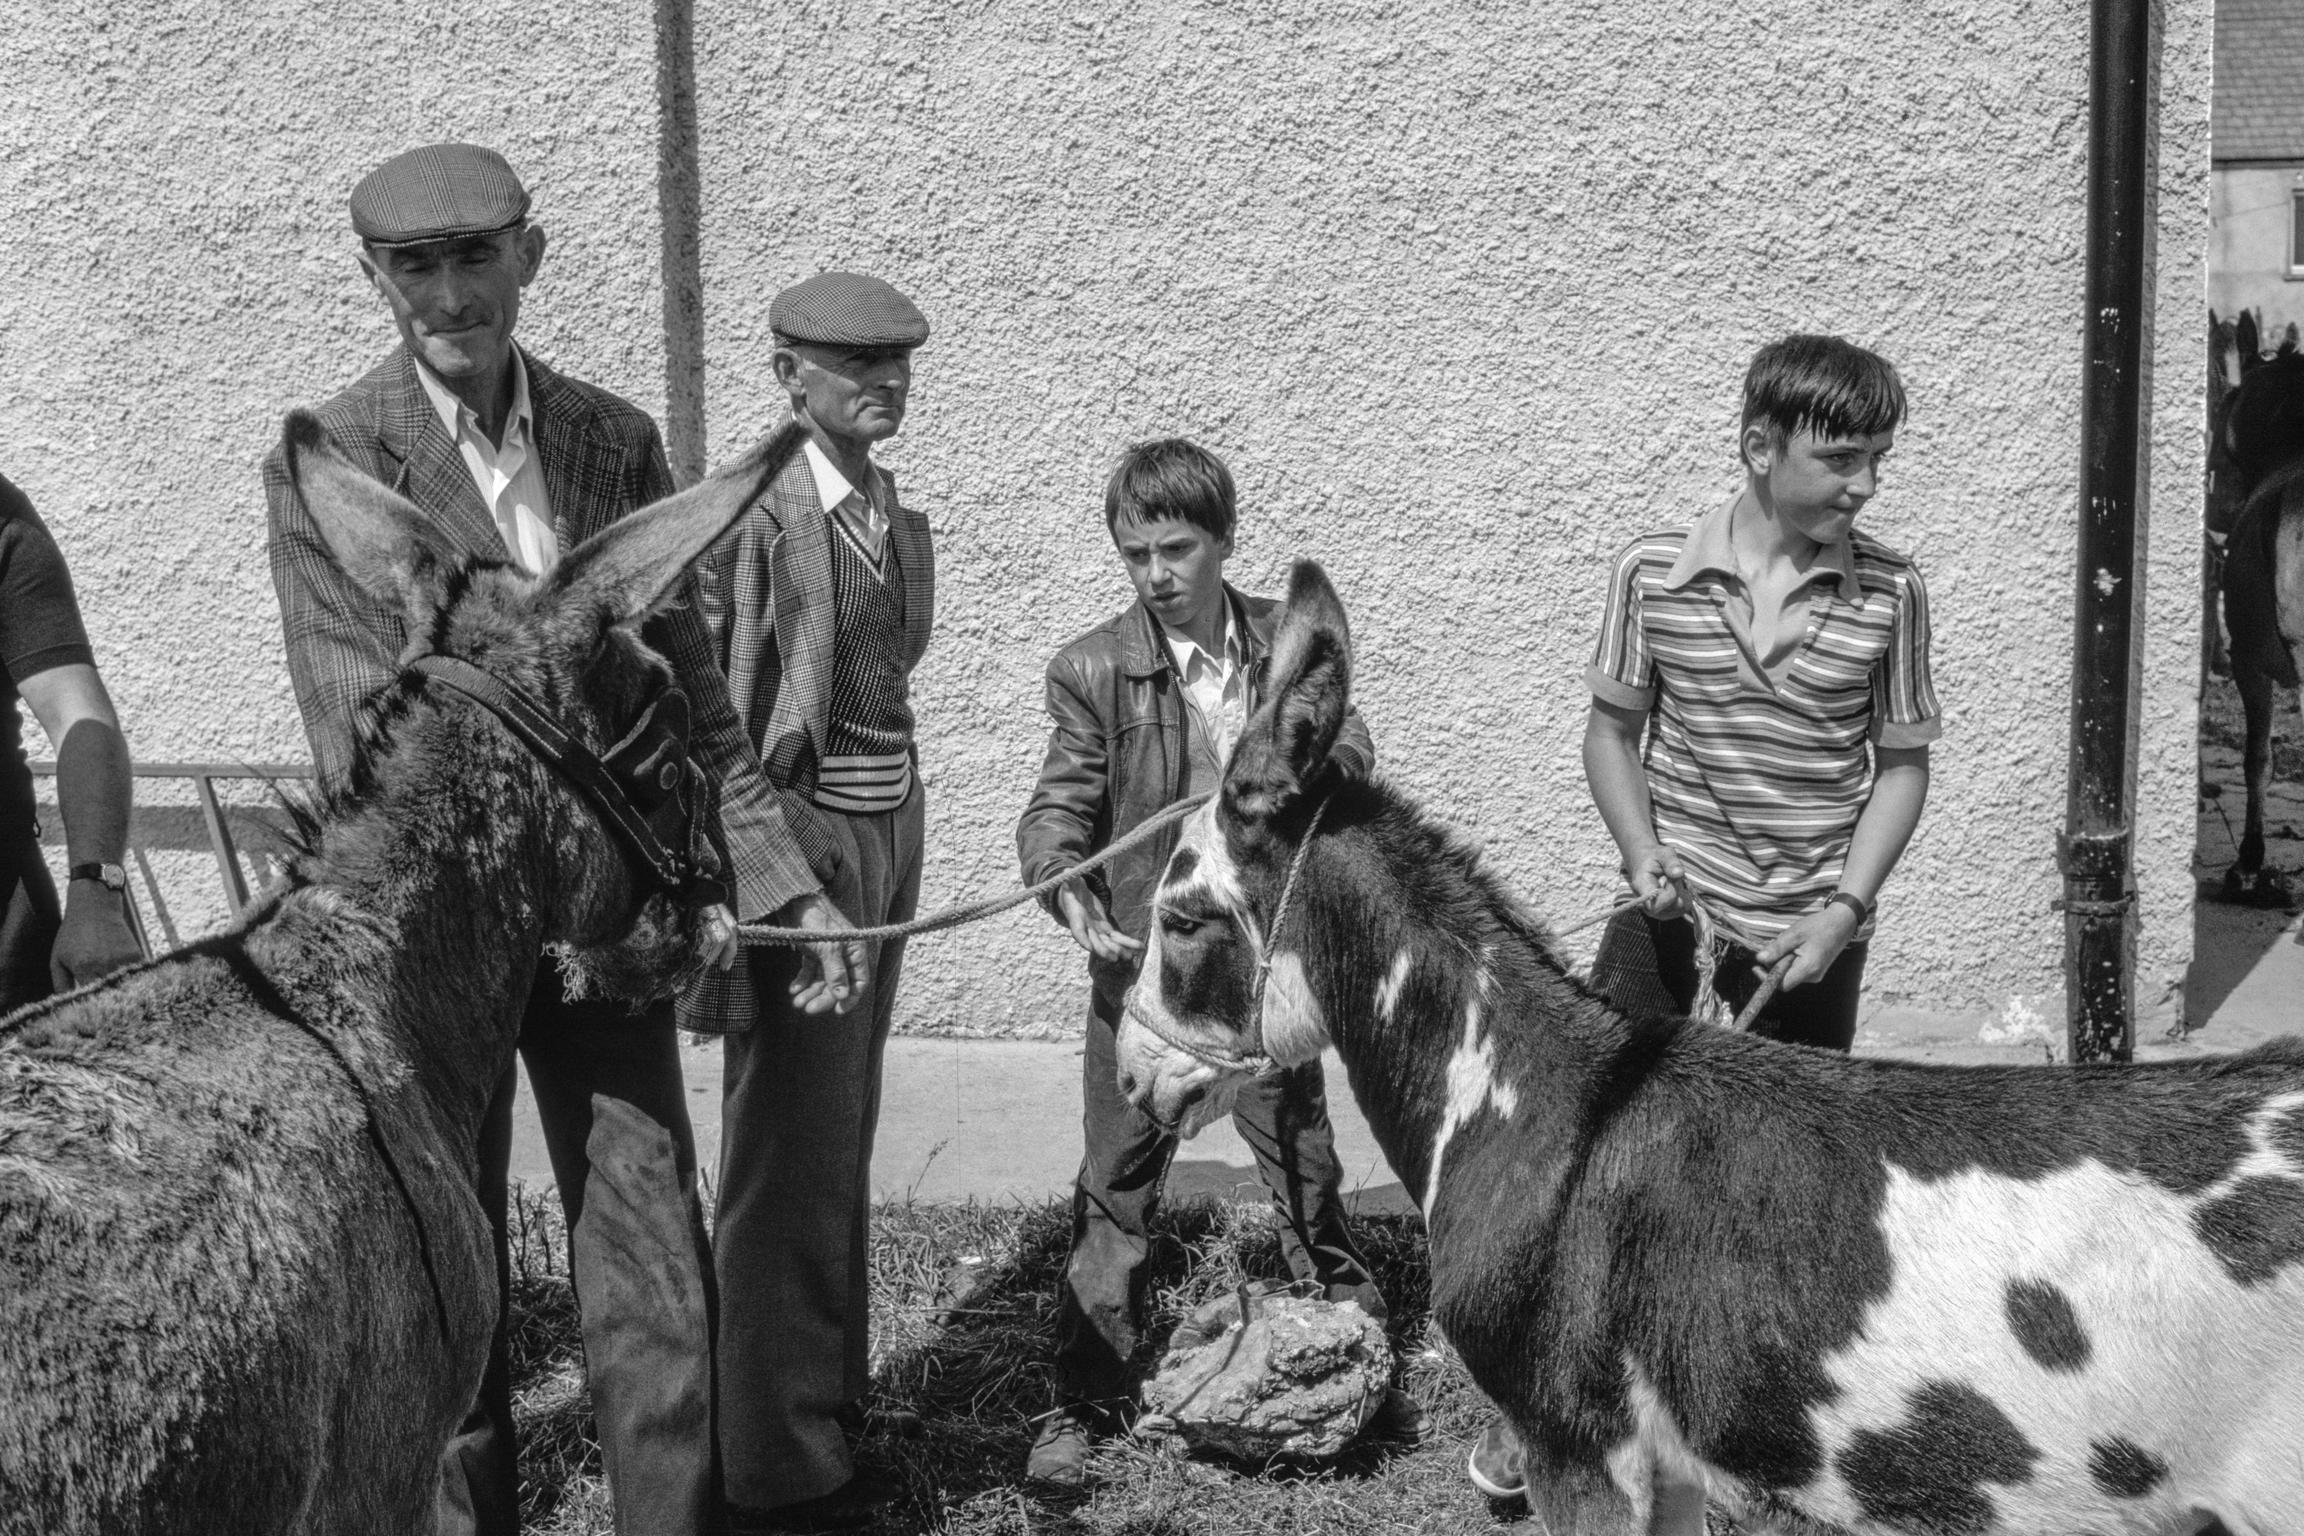 Puck Fair. The most attractive day is Gathering Day when their is the main sale of horses and donkeys. Killarney. Ireland